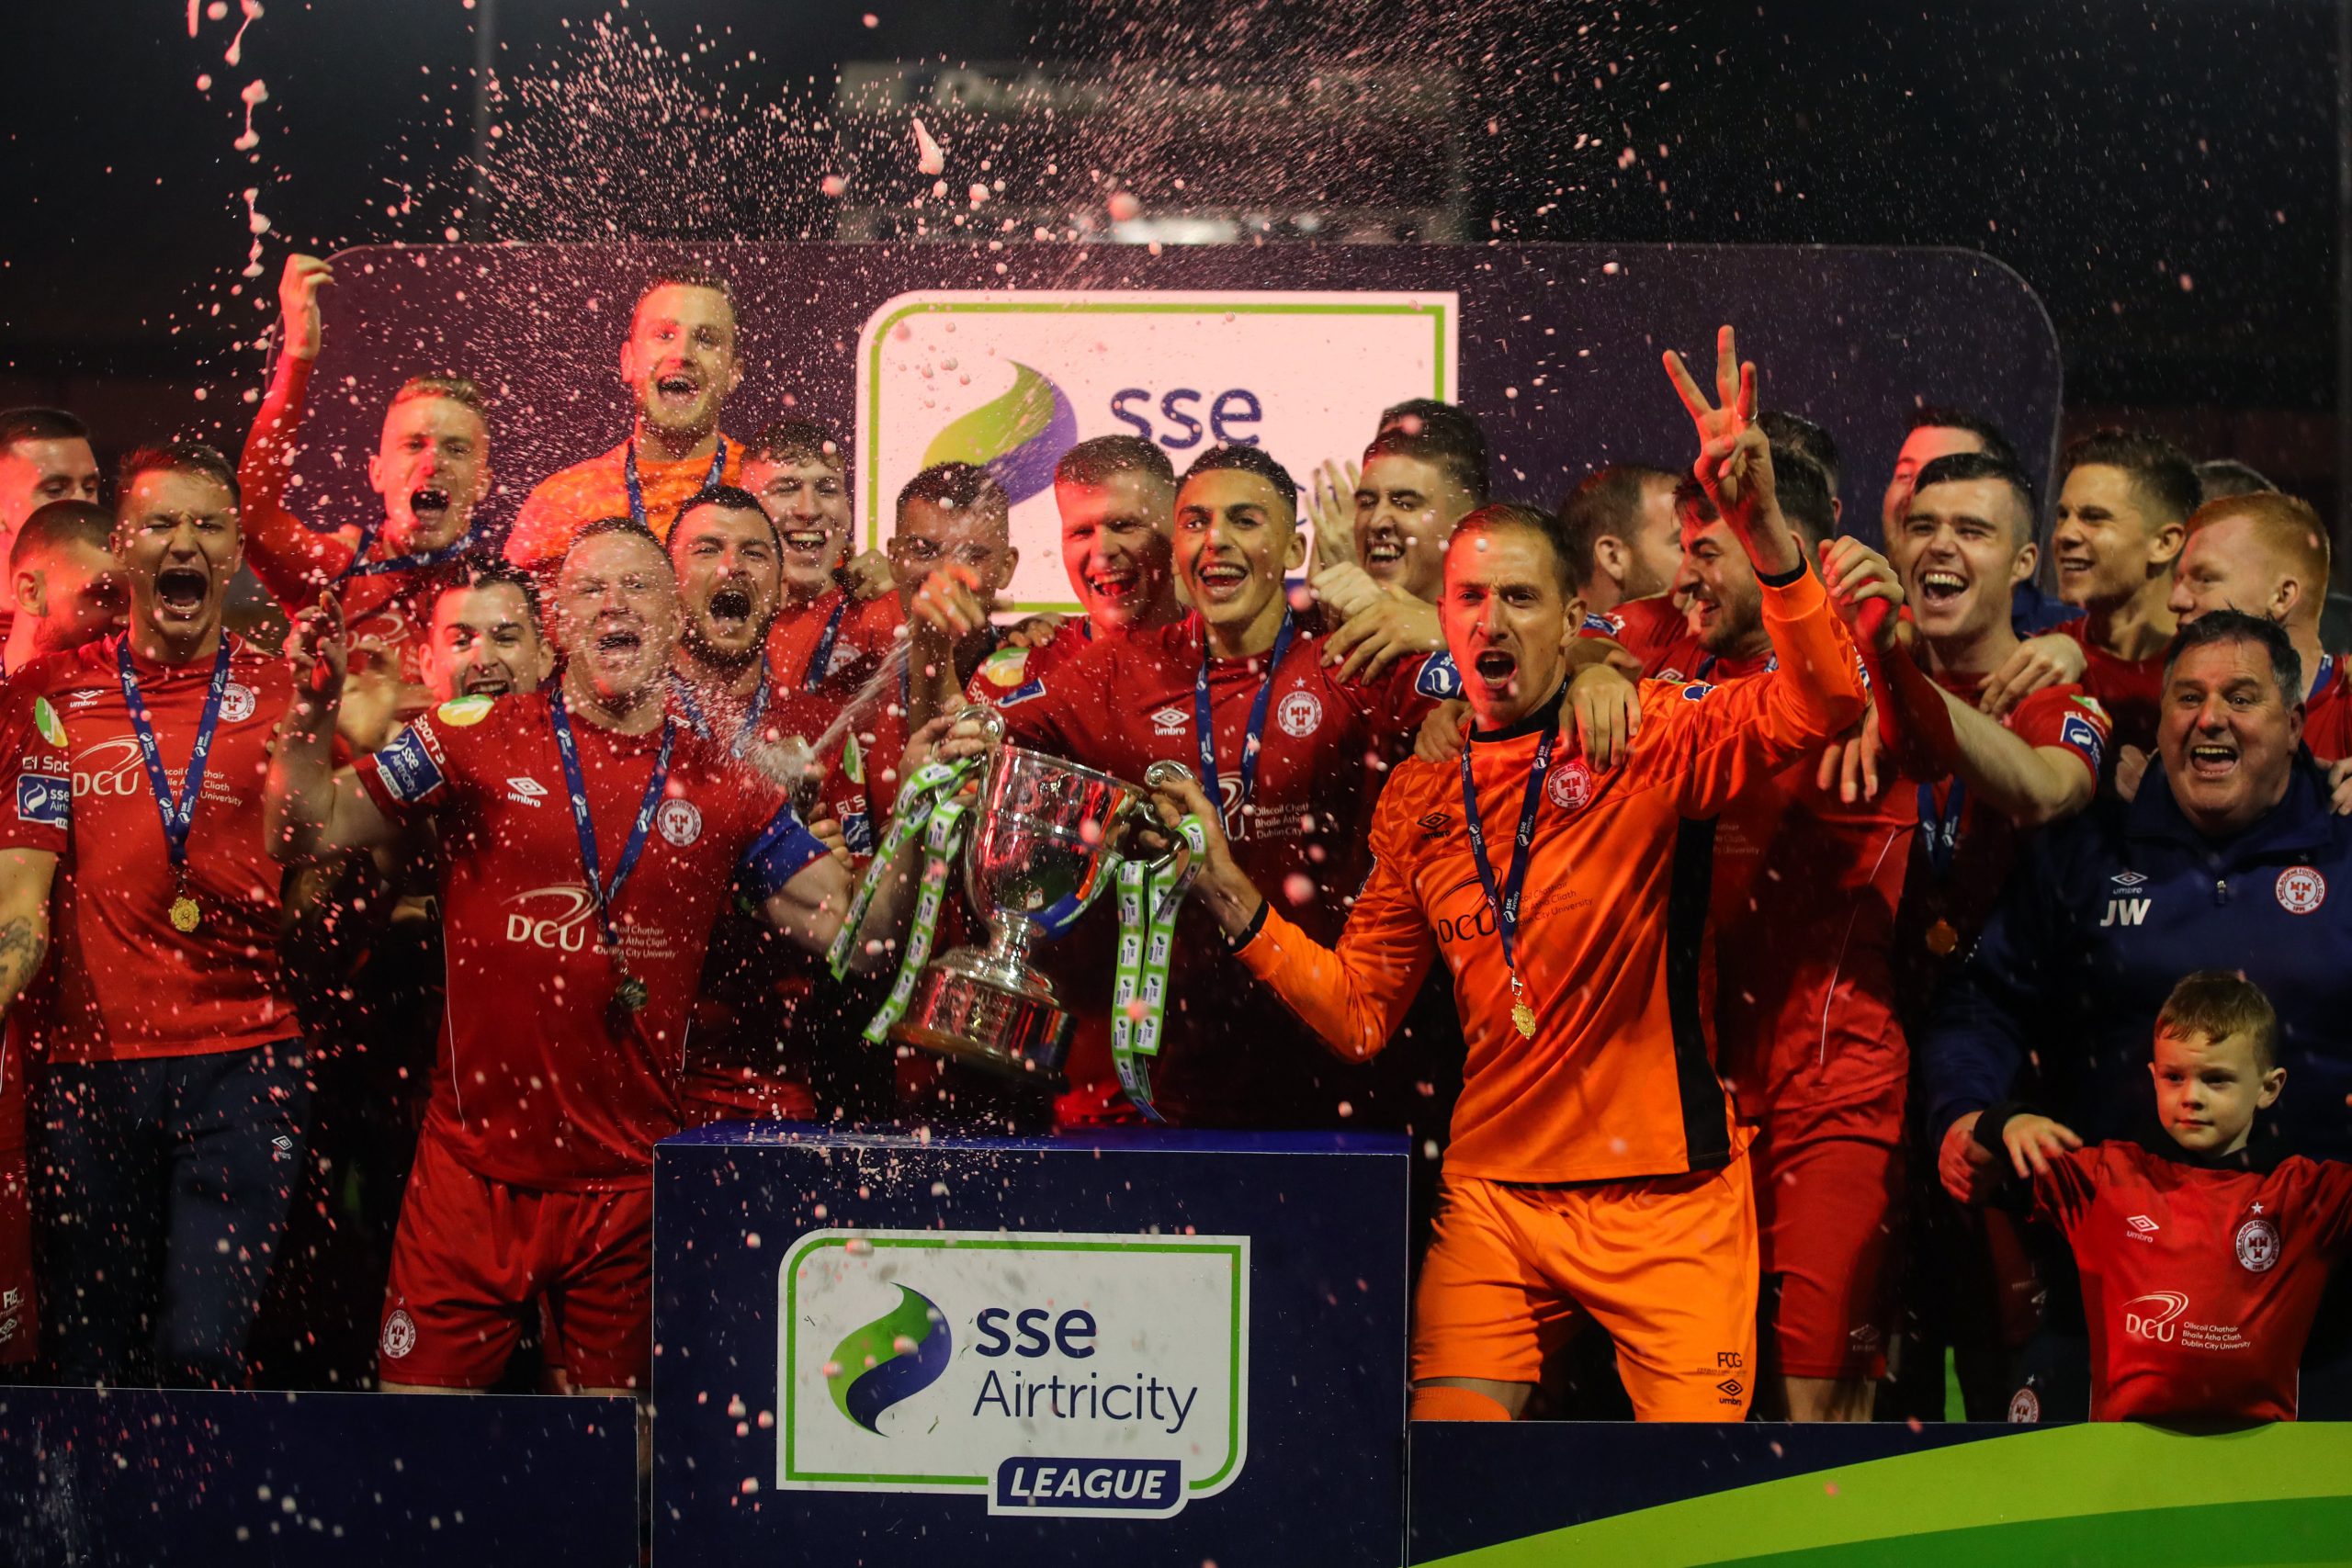 Shelbourne 7-0 Limerick : The Reds close out their title winning season in style!